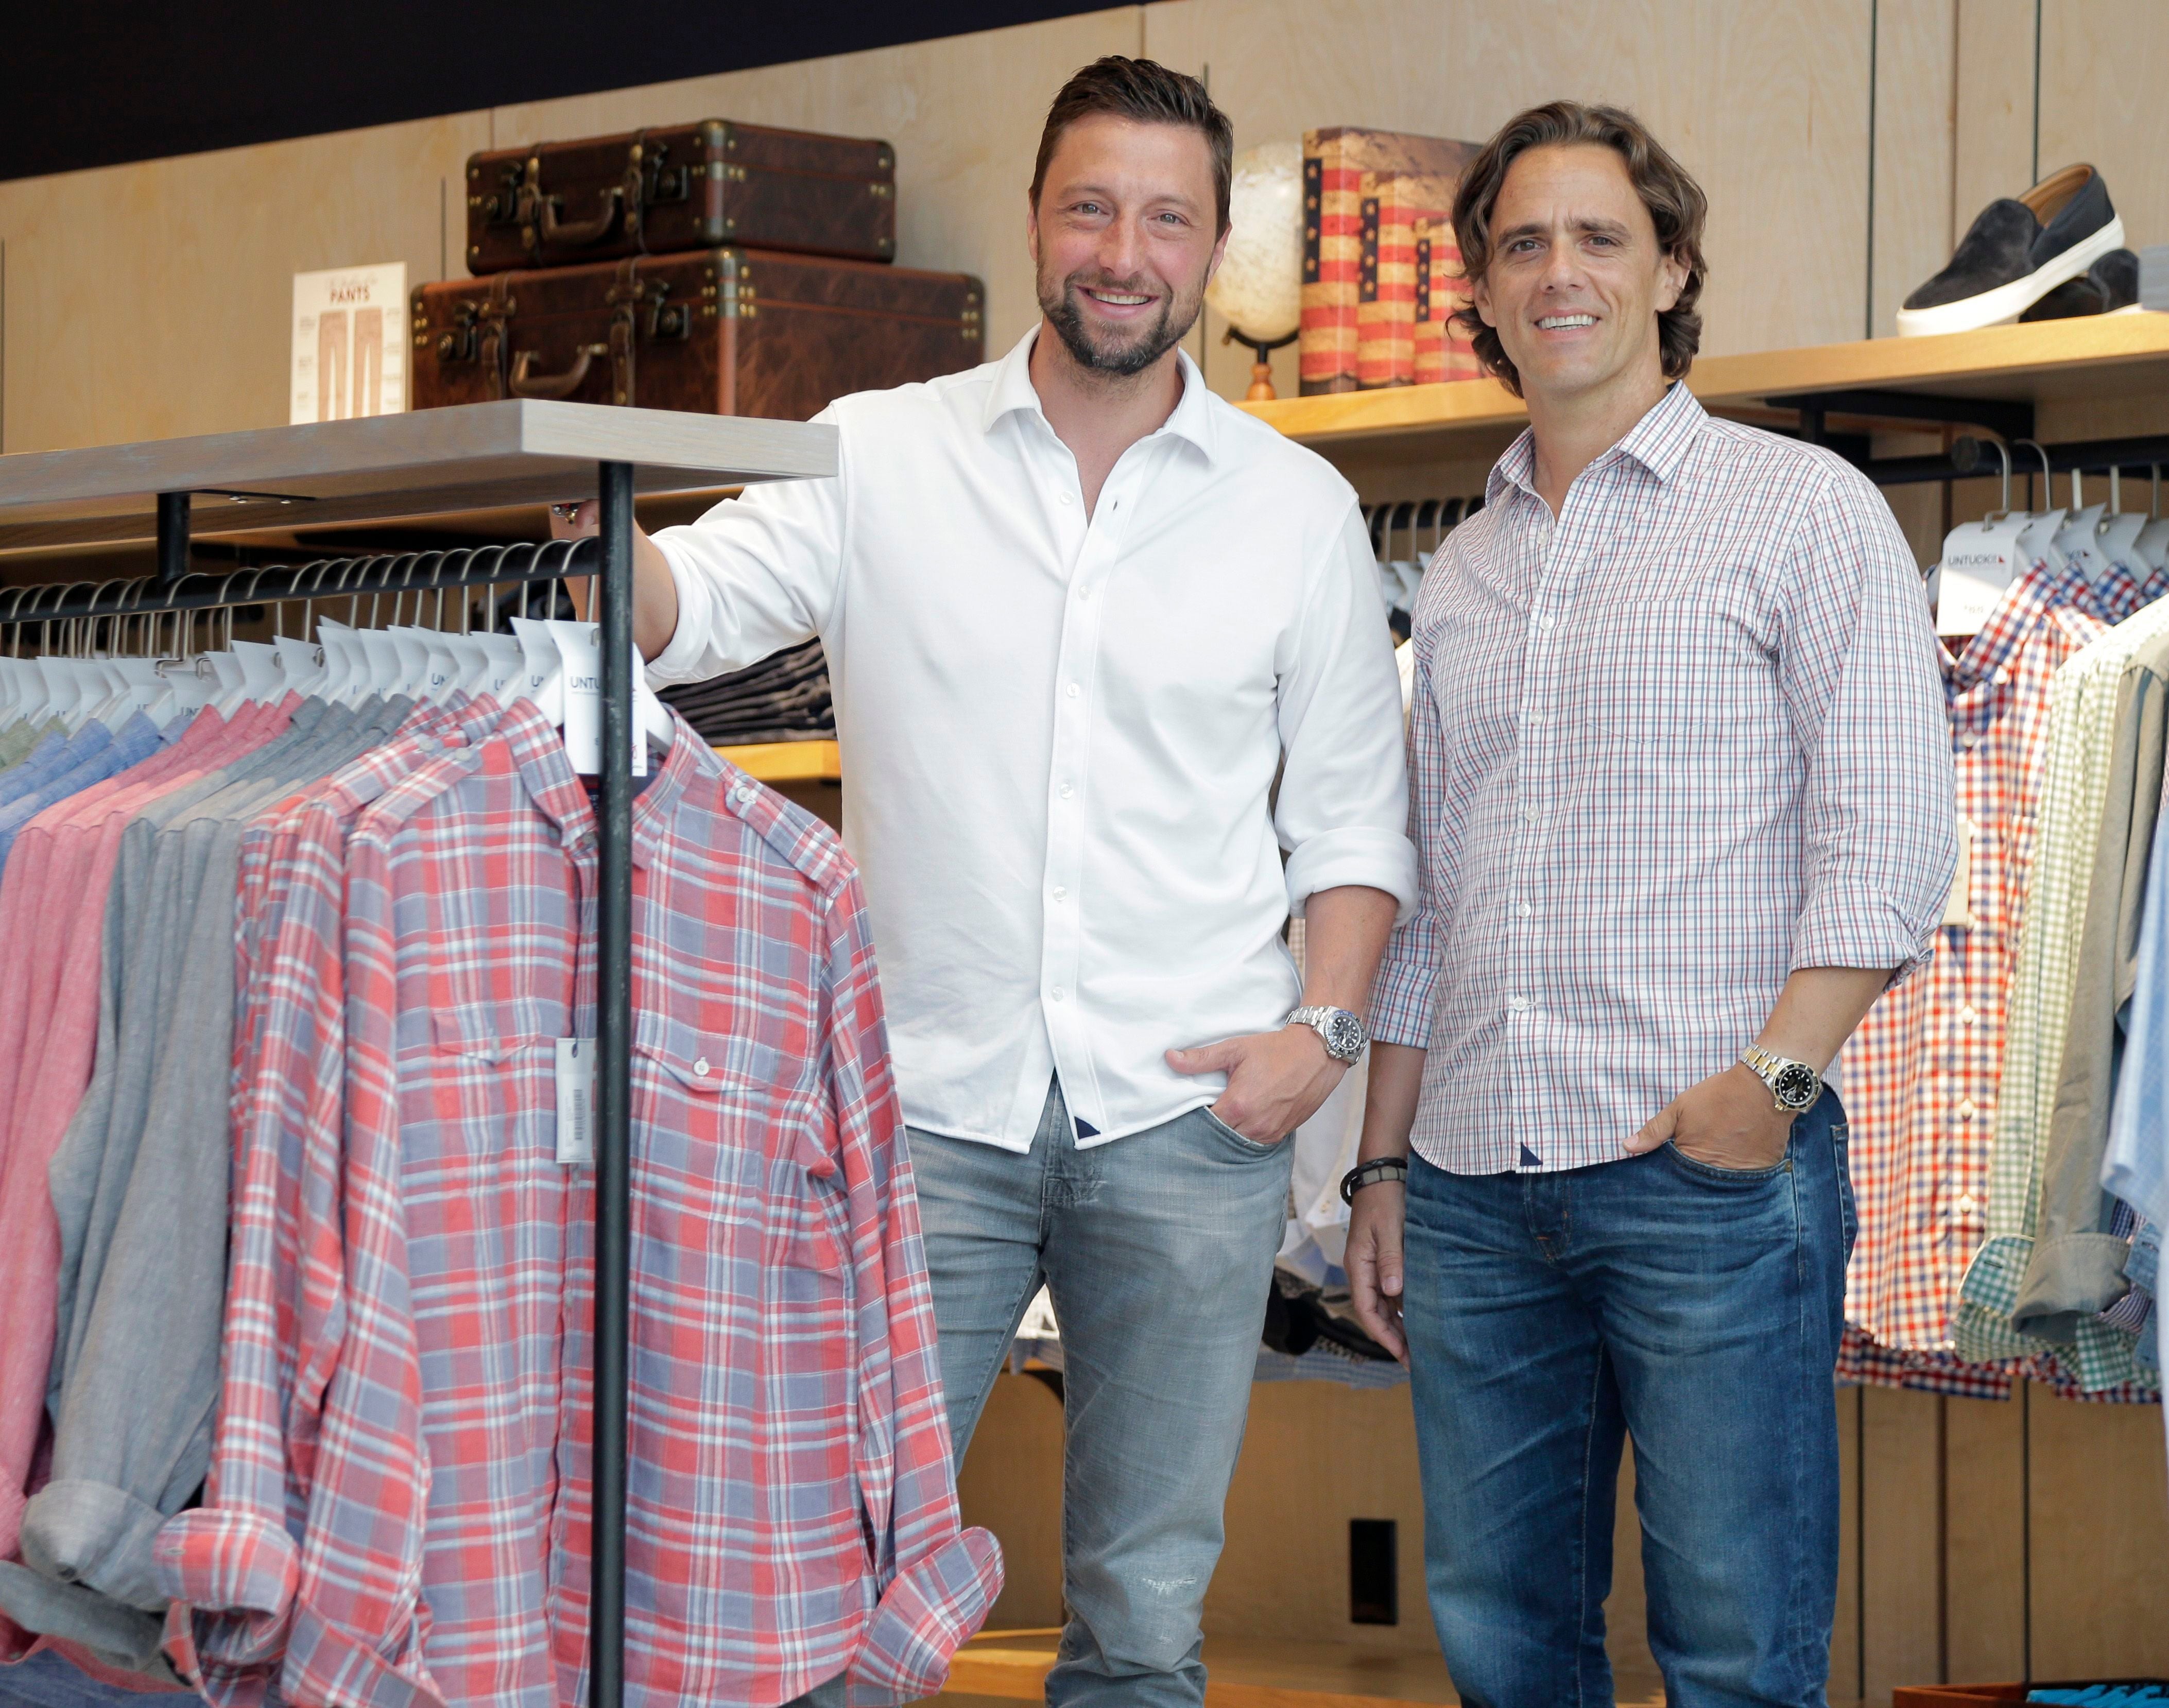 Co-Founders of UNTUCKit, Chris Riccobono and Aaron Sanandres